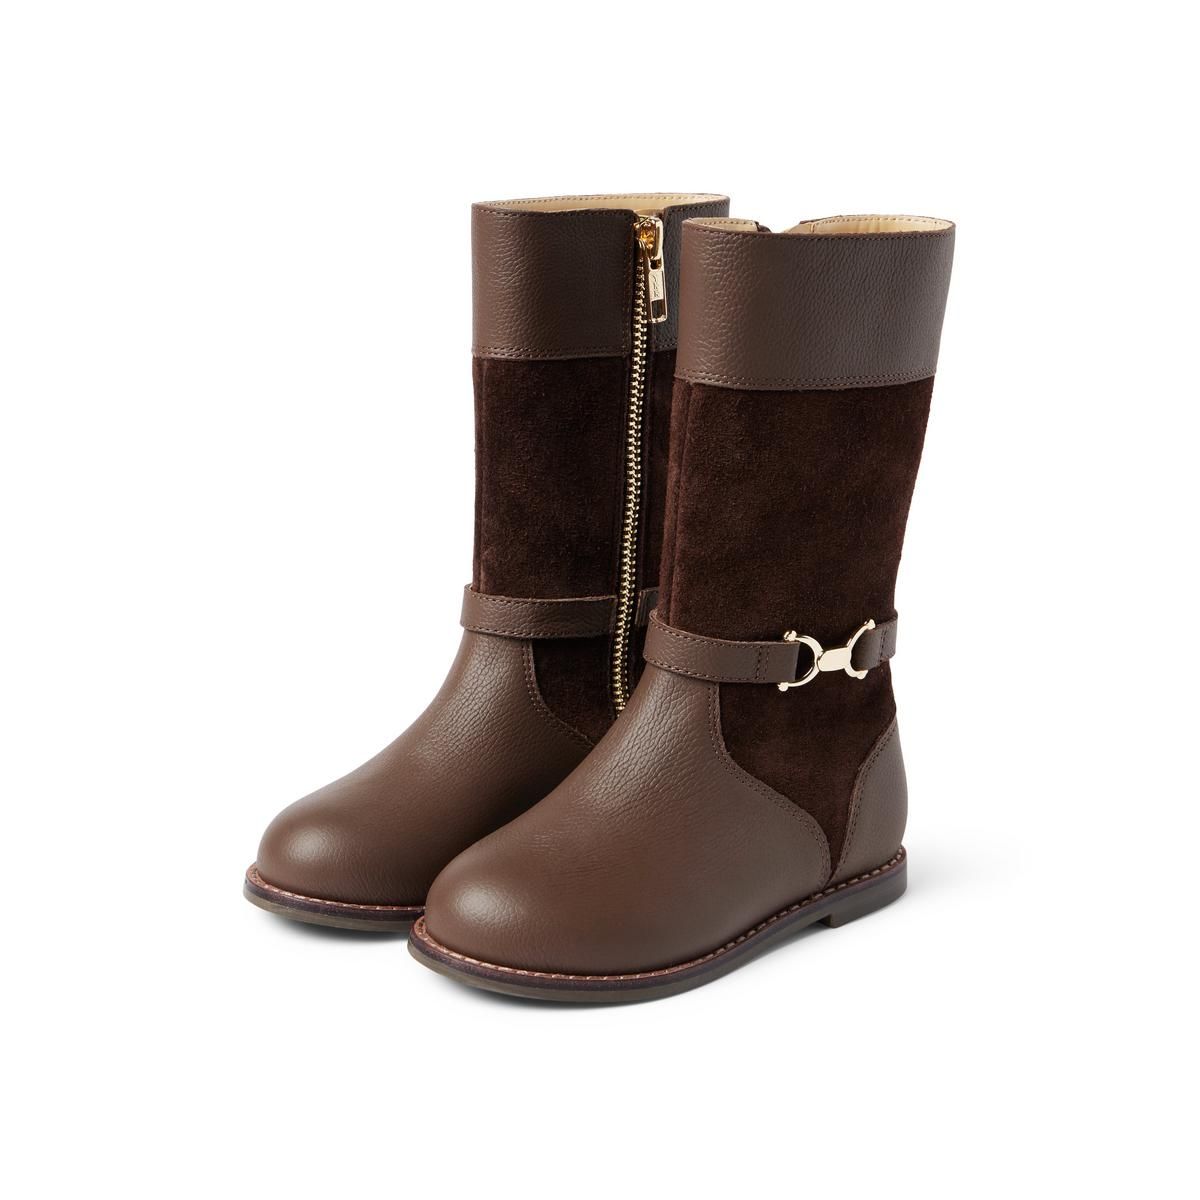 The Riding Boot | Janie and Jack